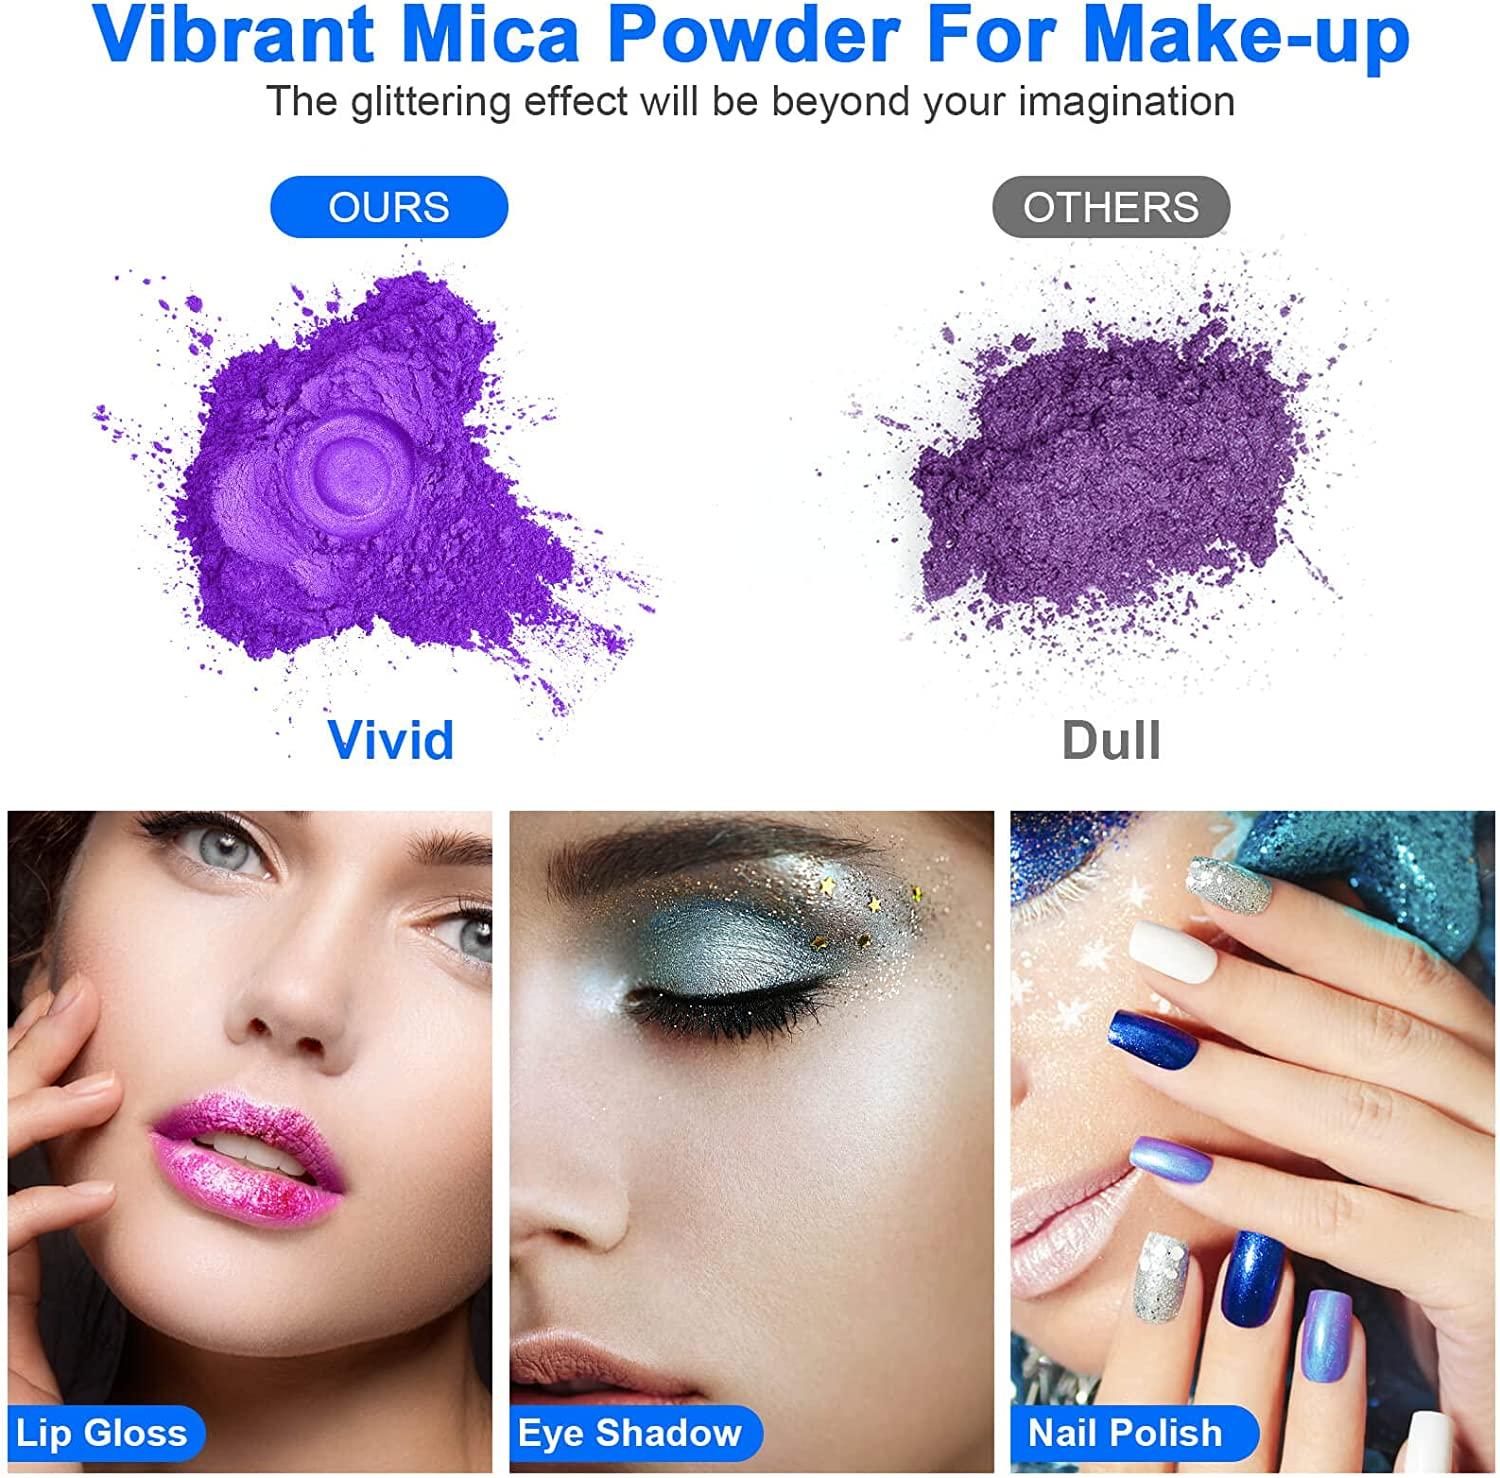 60 Colors Mica Powder-Natural Cosmetic Grade Pigment Powder for Epoxy Resin,Soap Making,Bath Bombs,Candle,Lip Gloss,Slime,DIY Crafts,Paints,Jewelry An